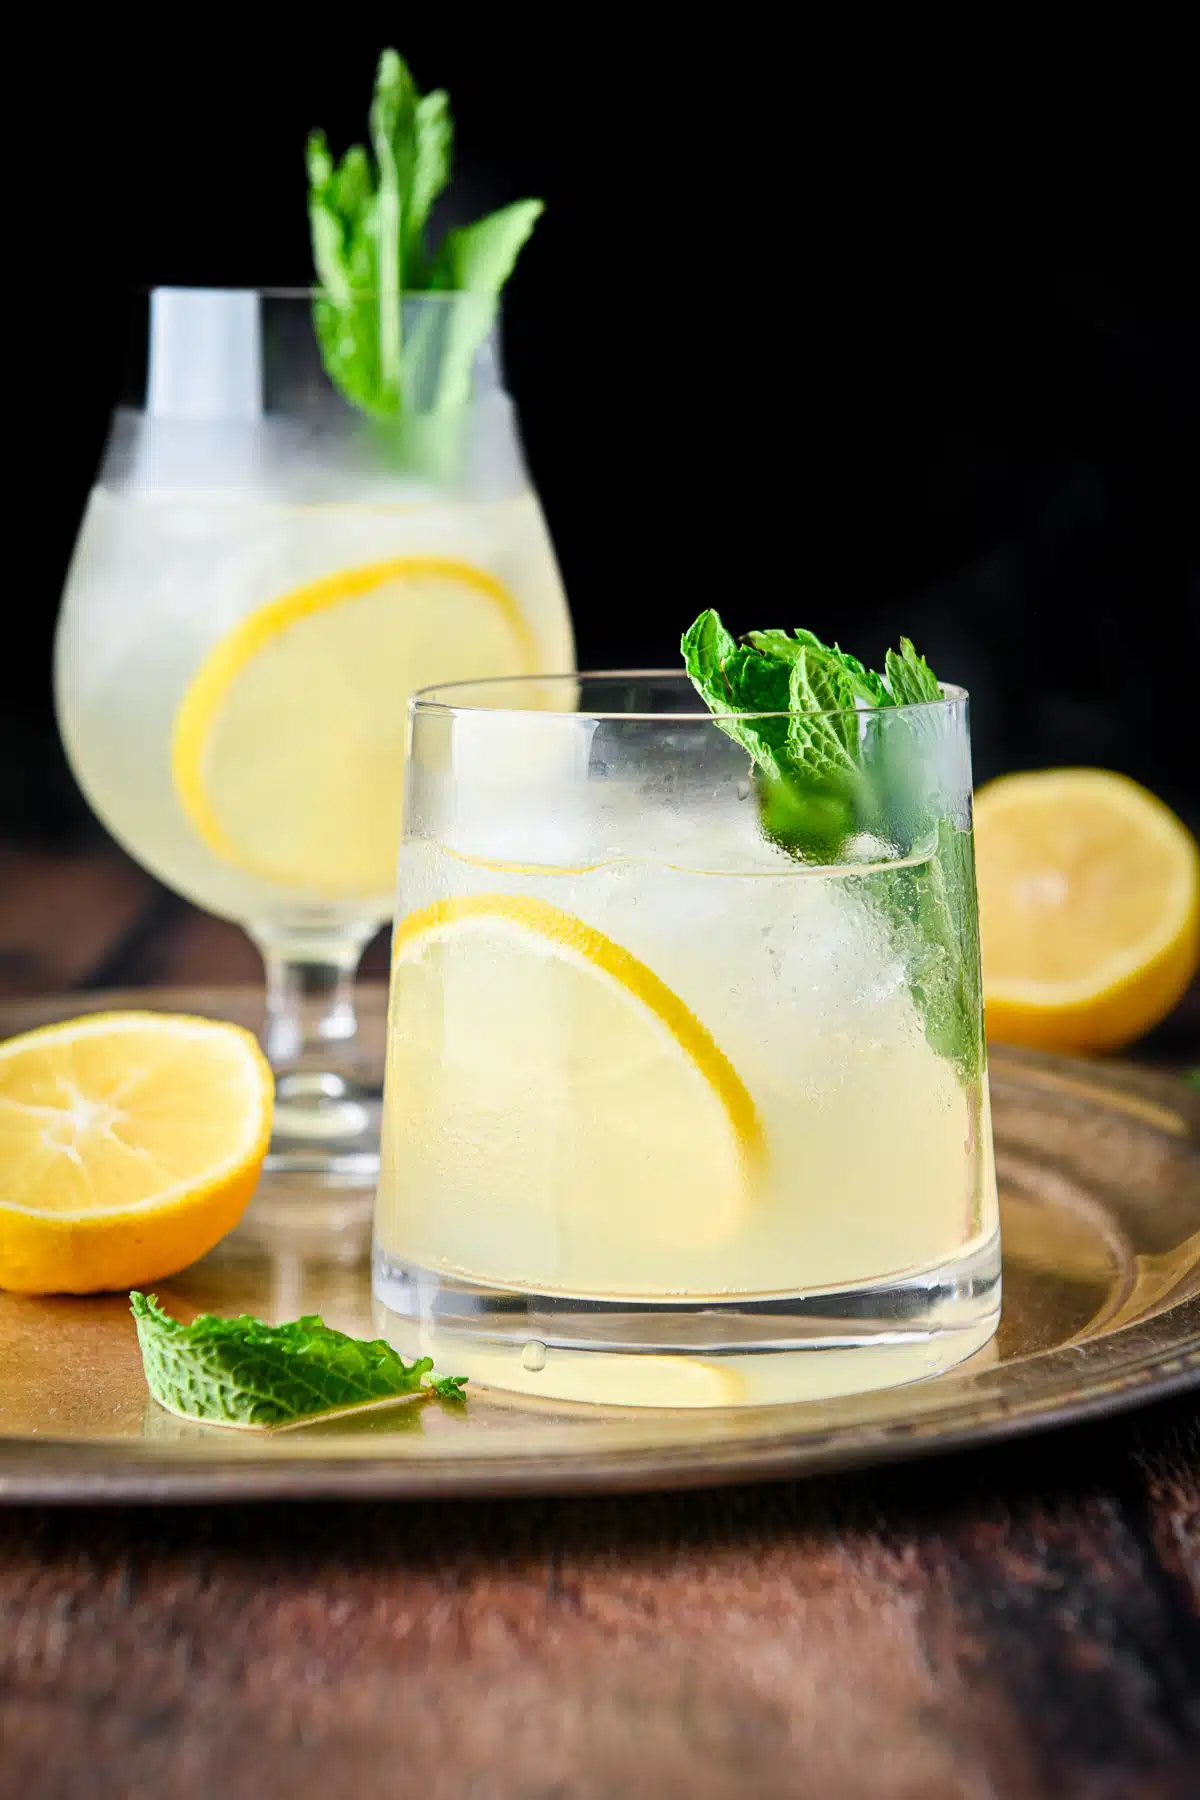 A double old-fashioned glass in front of a tulip shaped glass filled with the limoncello drink with lemon and mint